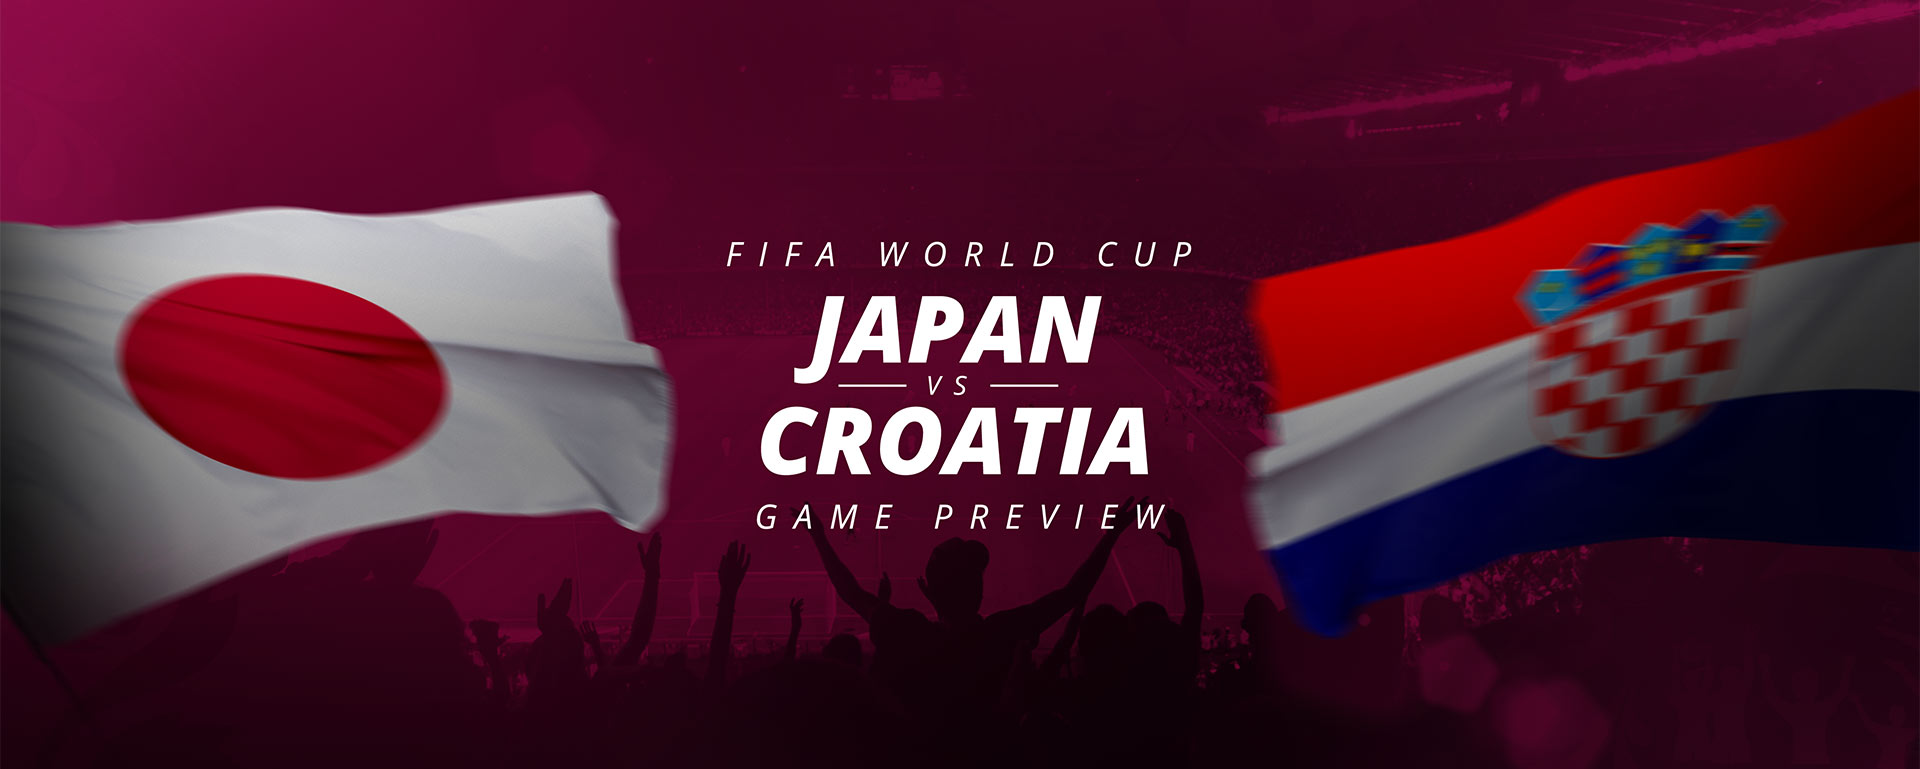 FIFA WORLD CUP: JAPAN V CROATIA – GAME PREVIEW